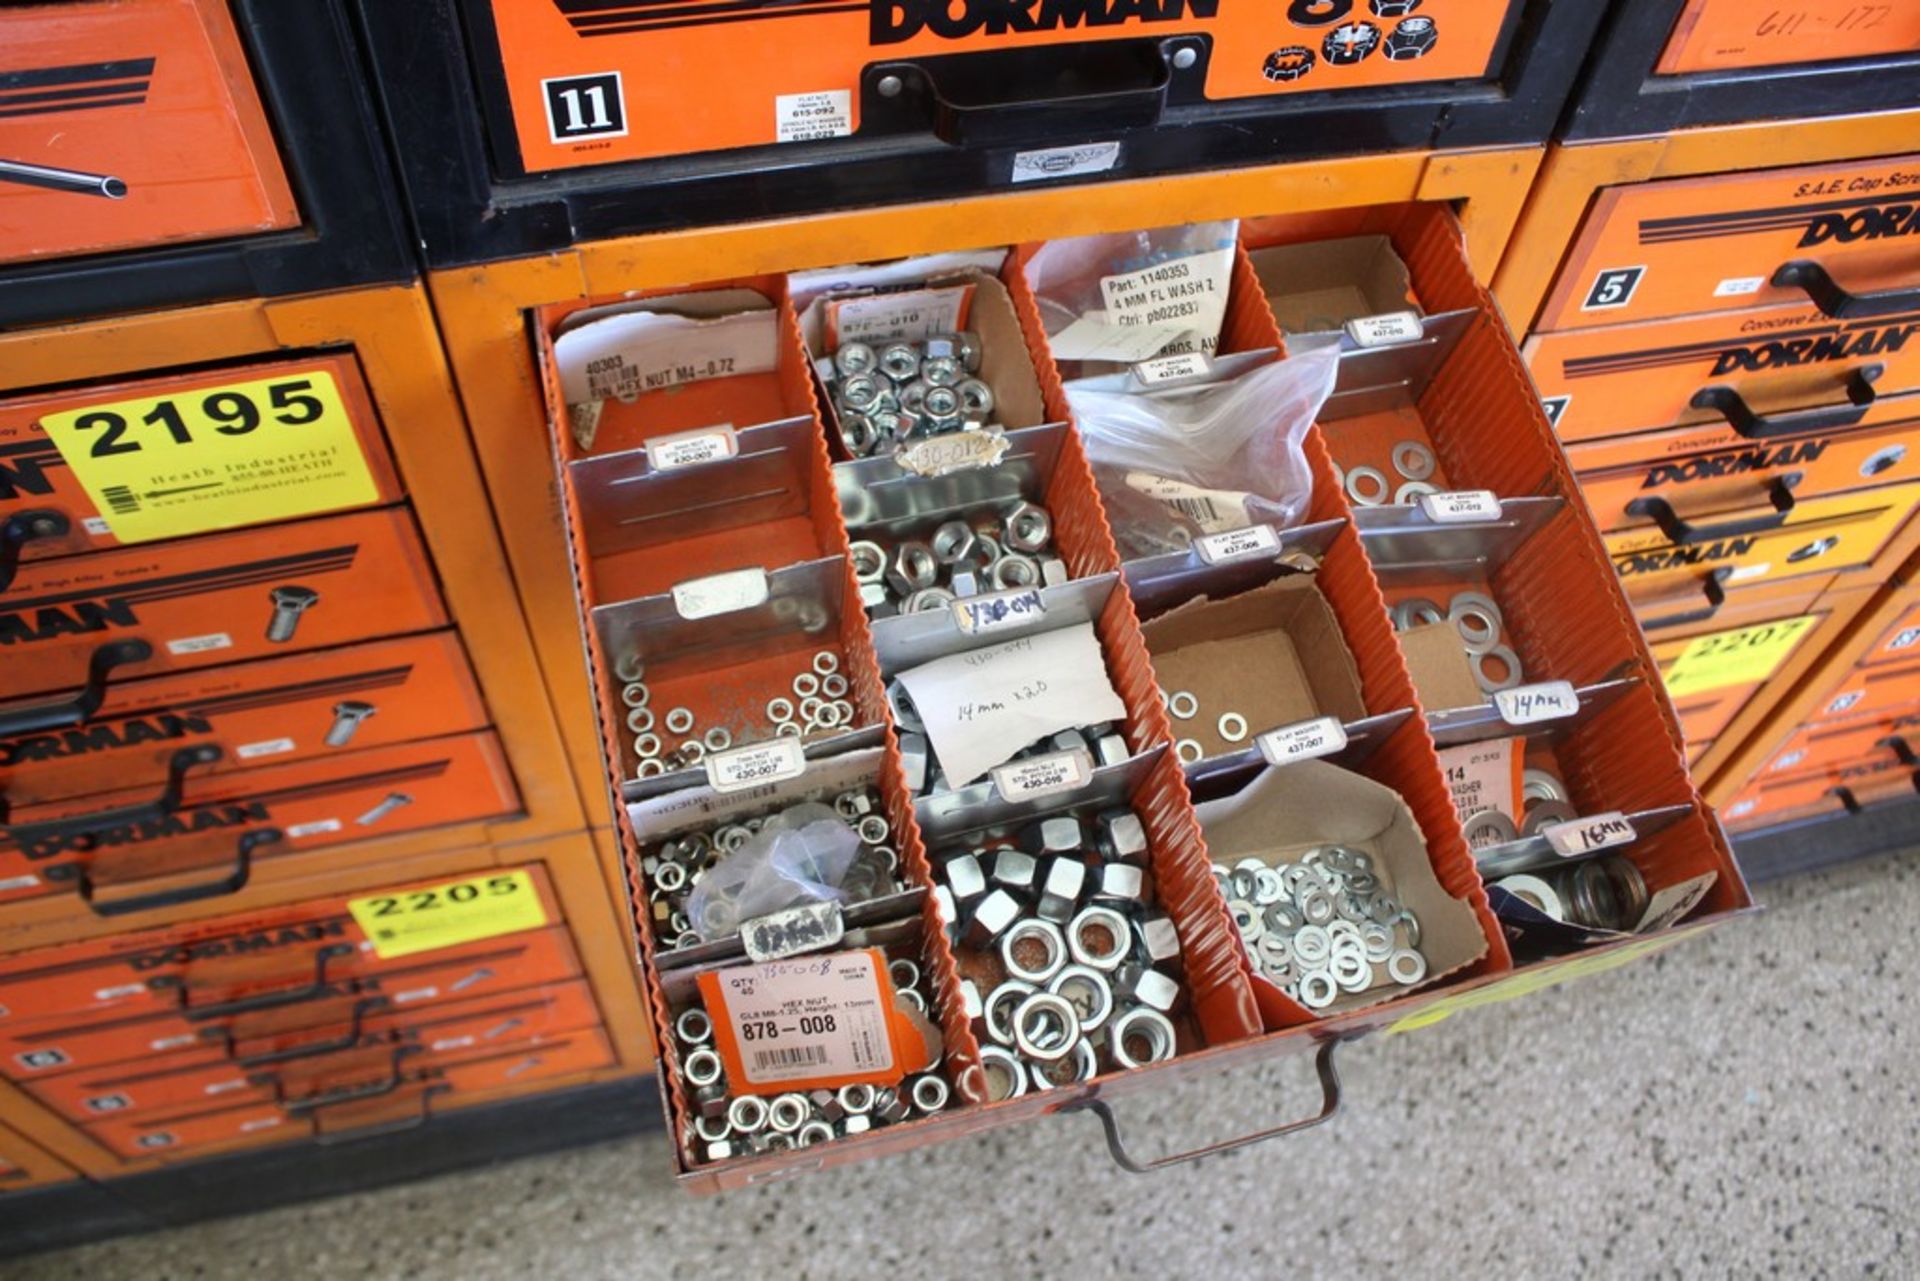 DORMAN FOUR DRAWER CABINET, CONTENTS INCLUDES METRIC NUTS, WASHERS AND CAP SCREWS - Image 2 of 5